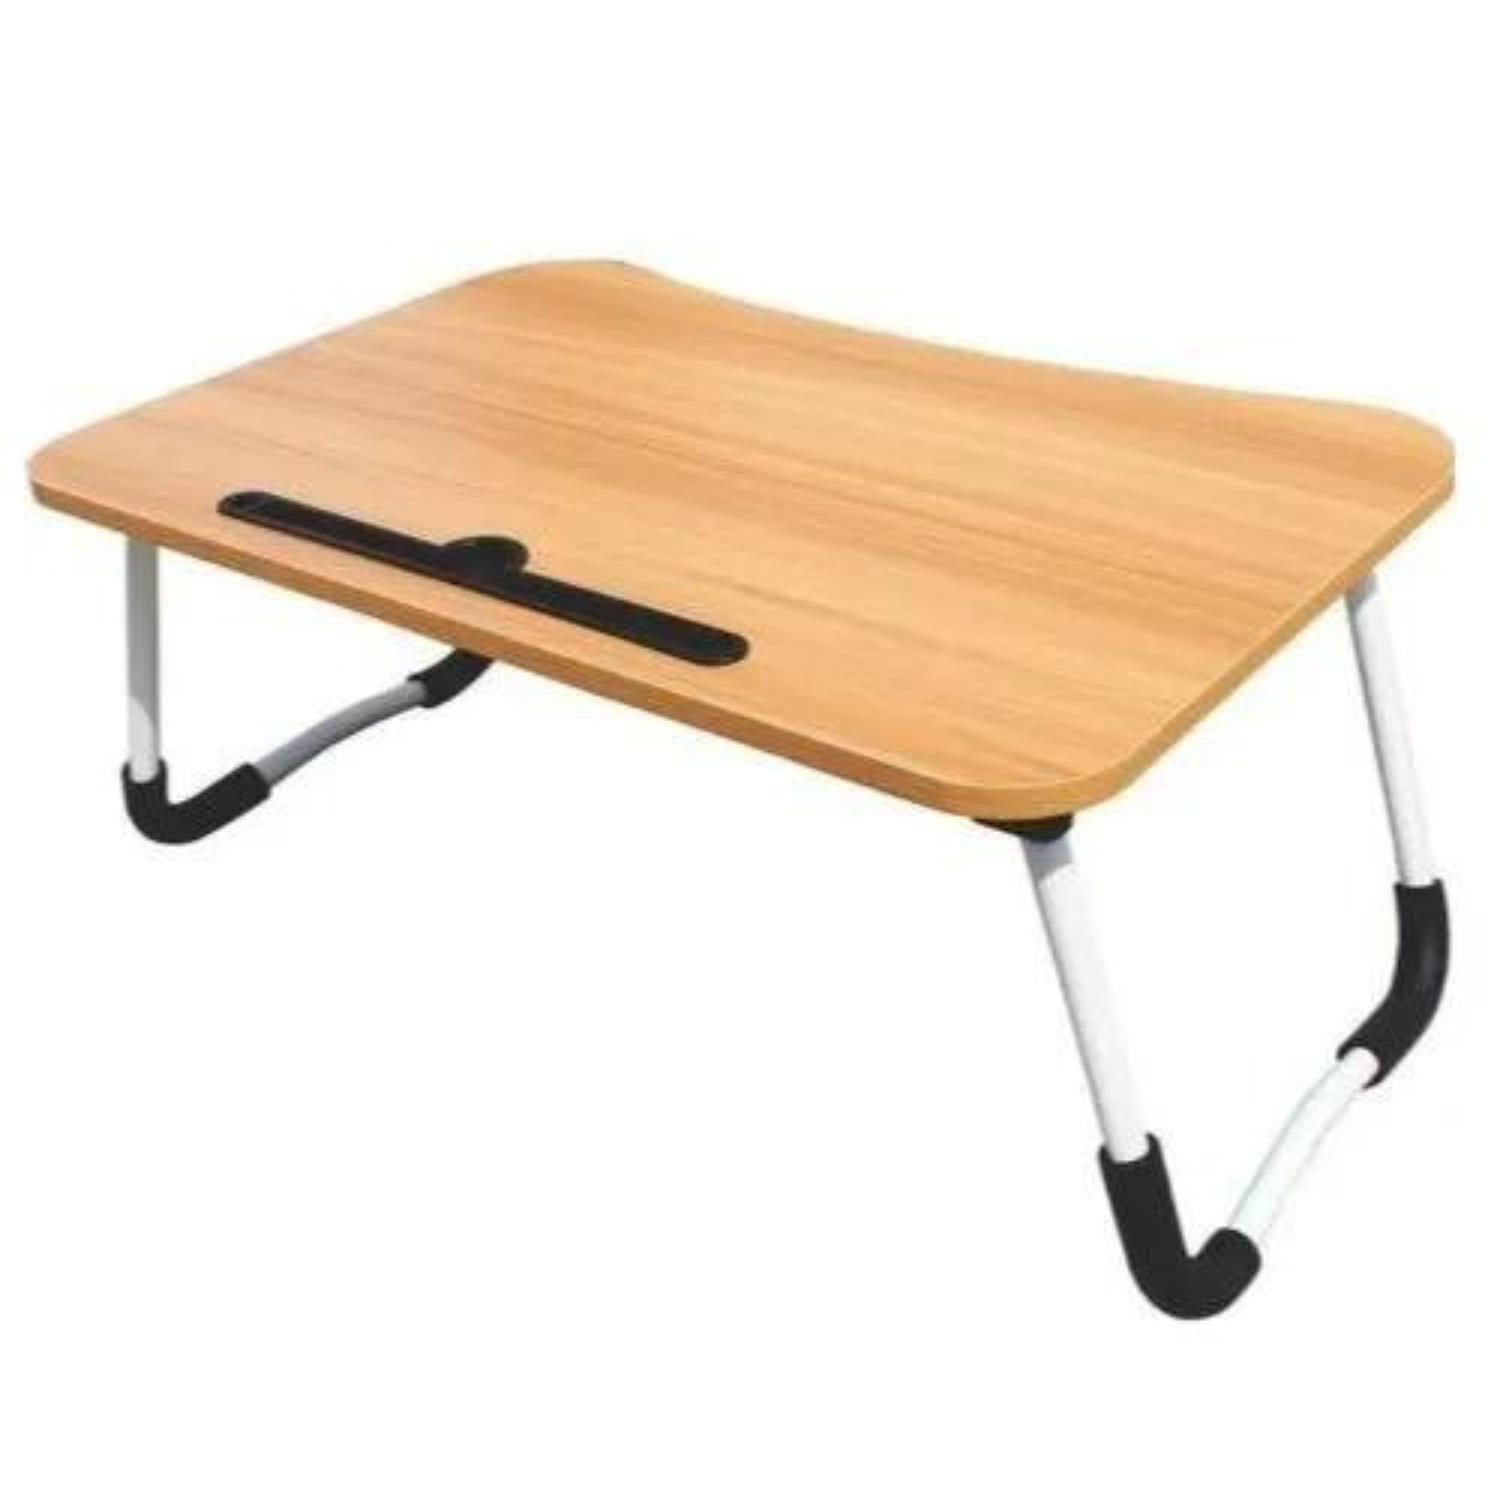 Multi-purpose laptop/study/meals Solid Wooden Table